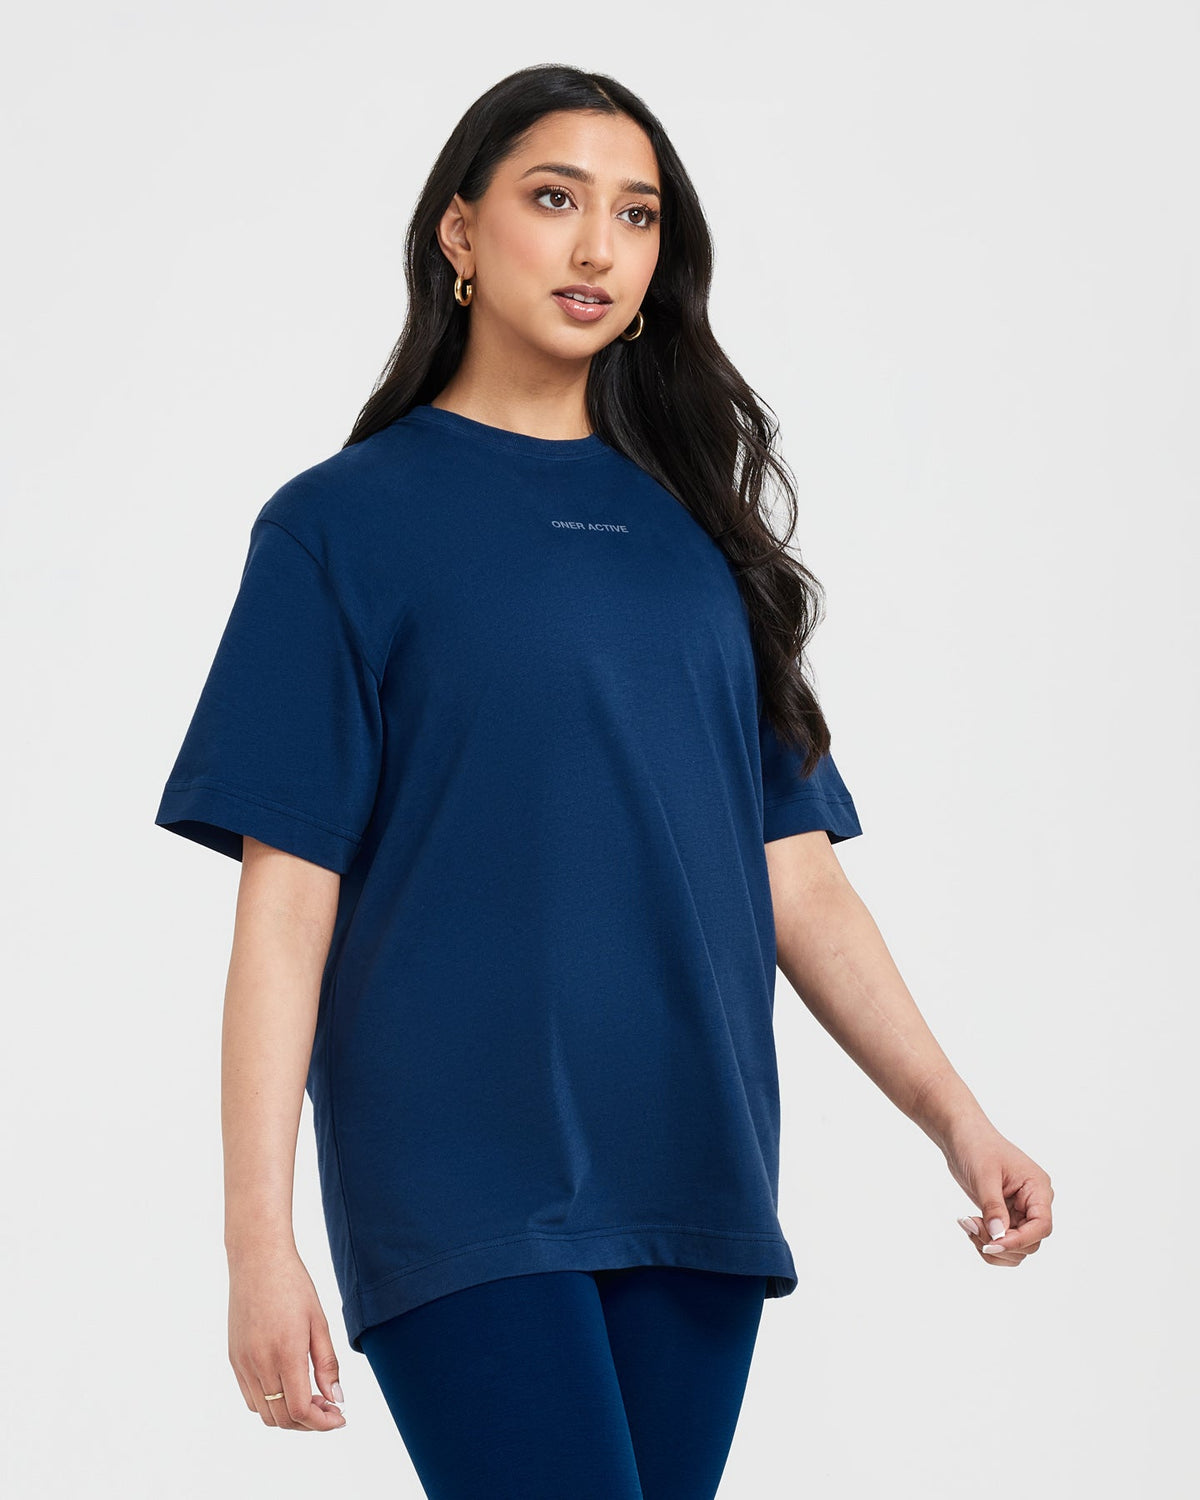 Oversized Graphic T-Shirts for Women | Oner Active